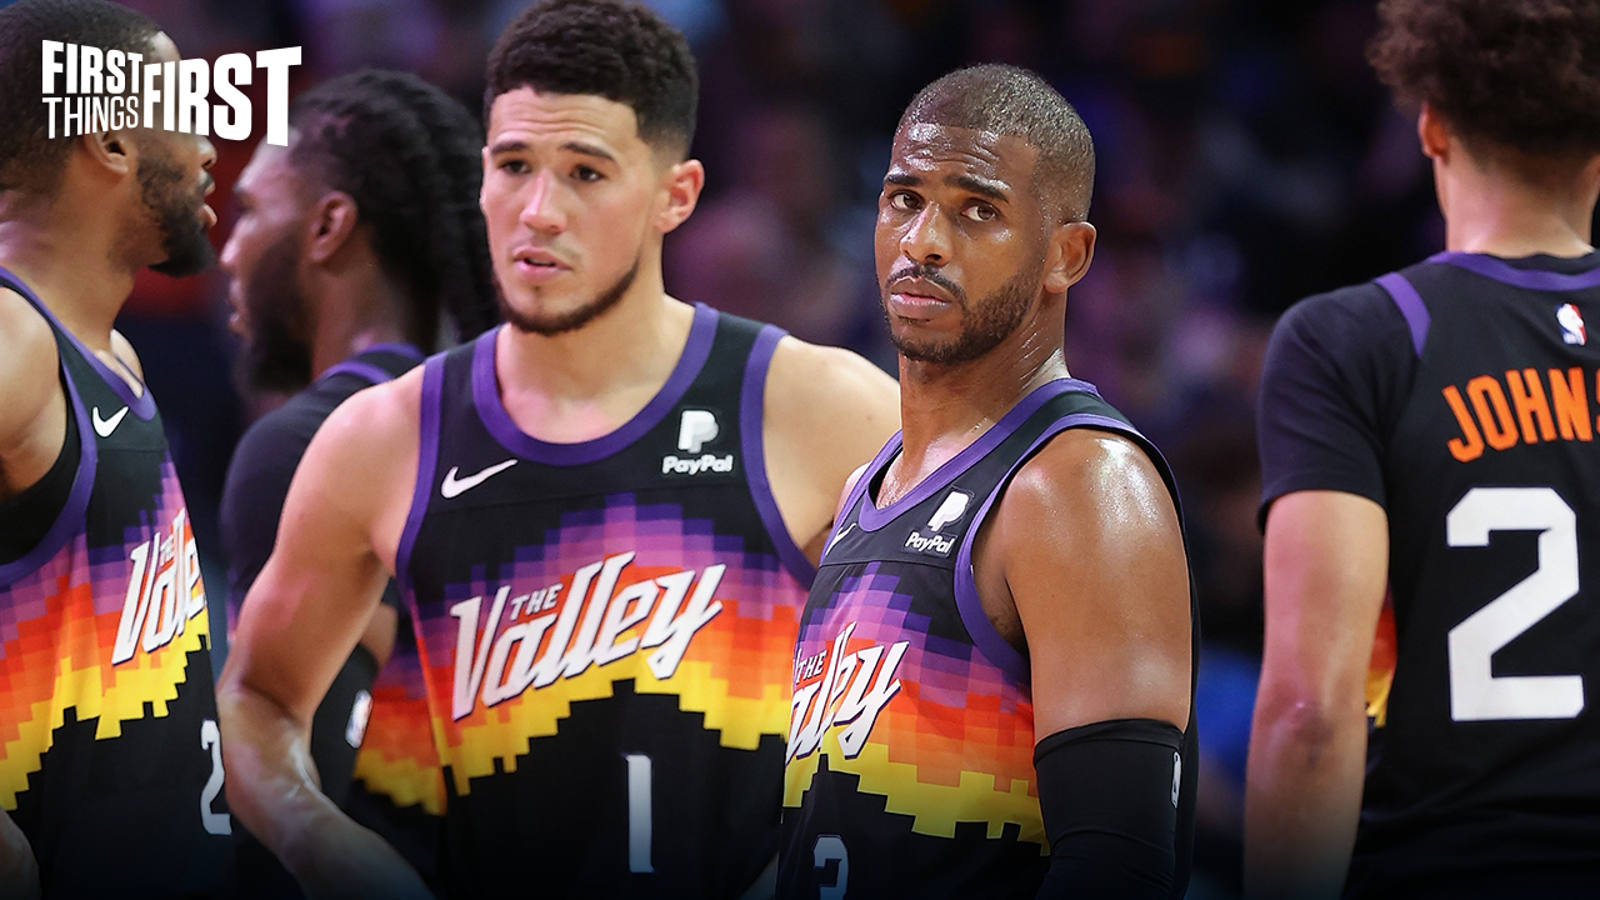 Chris Paul or Devin Booker: Who's to blame for Suns' exit?